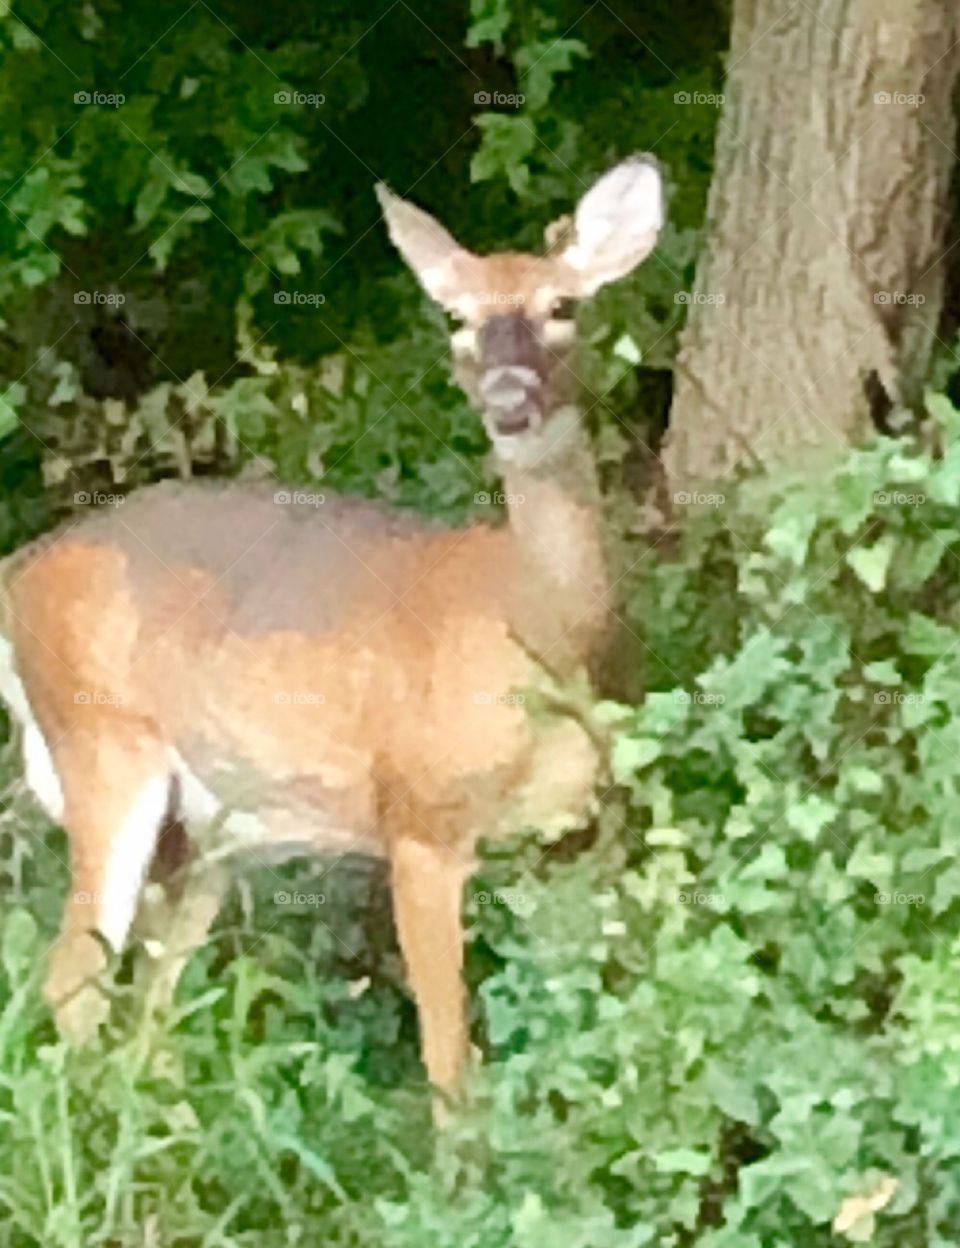 Beautiful deer looking up from her evening snacking in the woods 